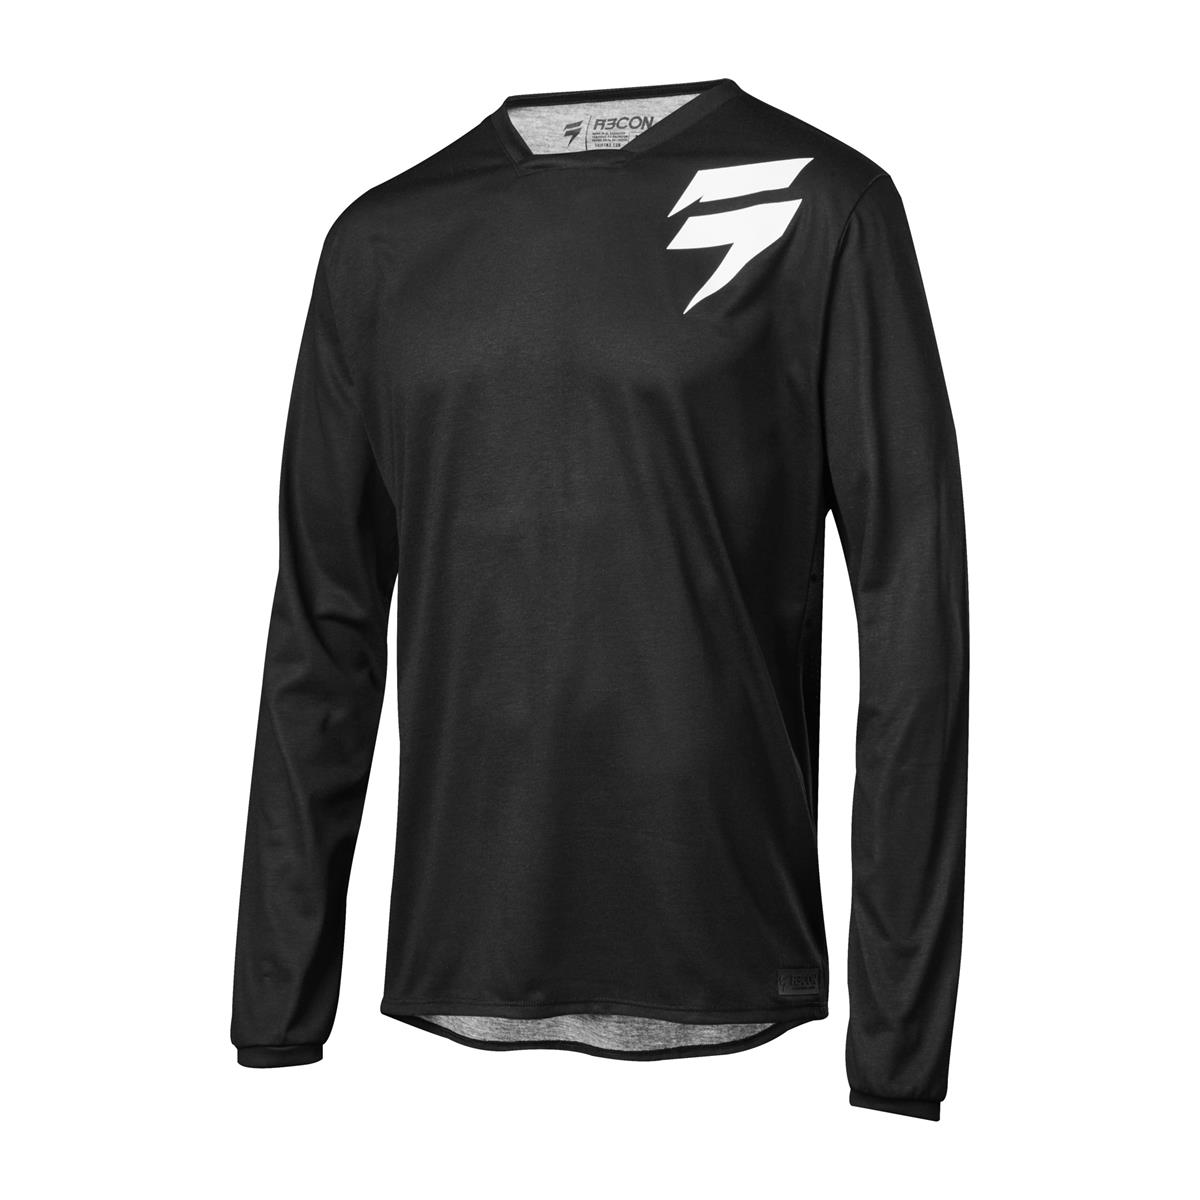 Shift Jersey Recon Muse Schwarz